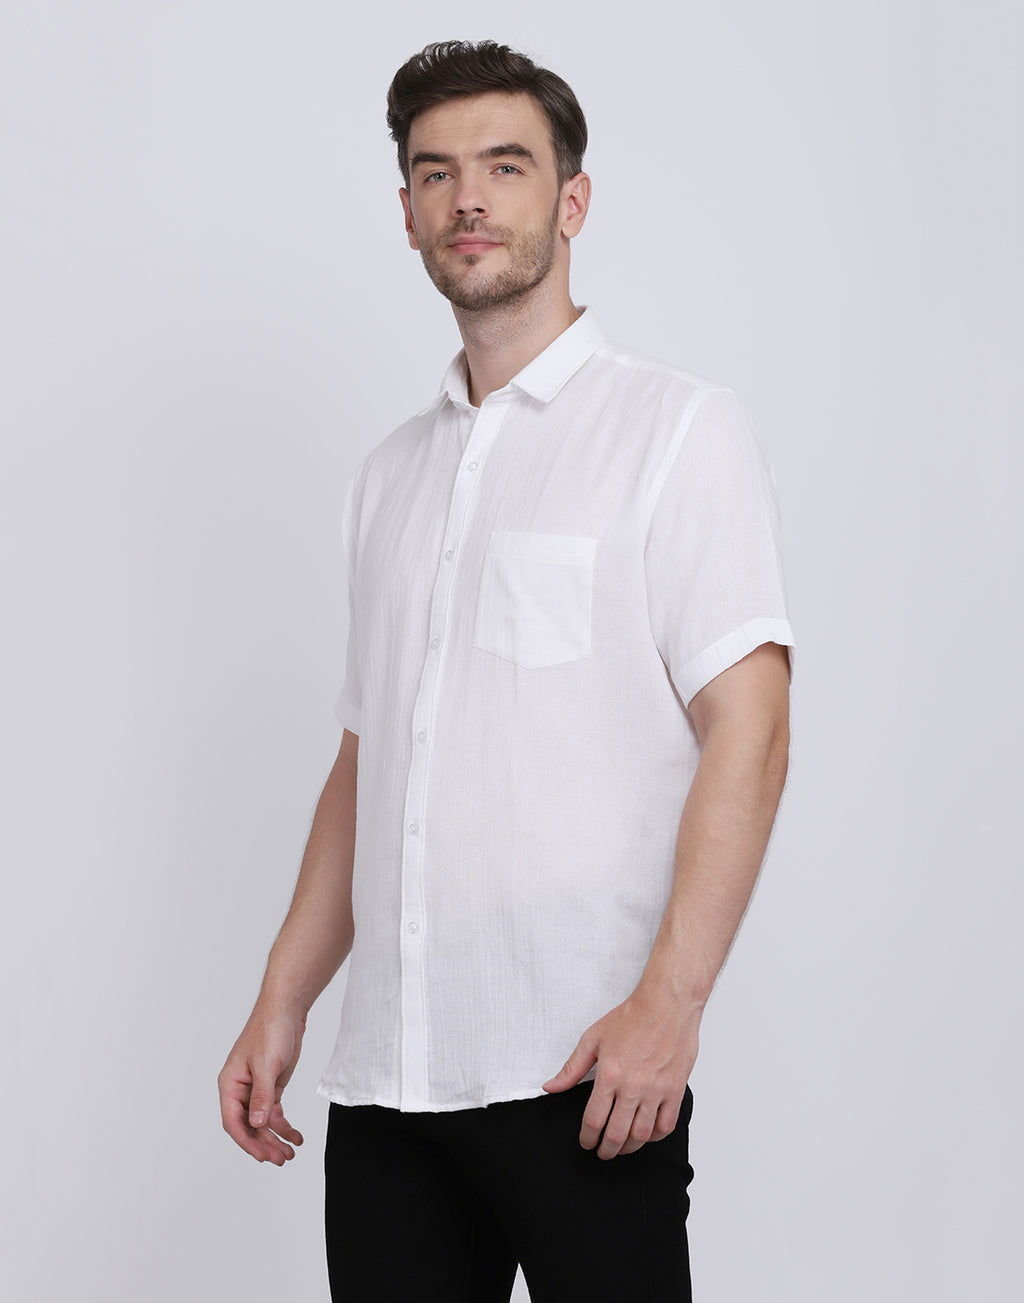 Double Cloth Crinkled Cotton men's Half Sleeves shirt